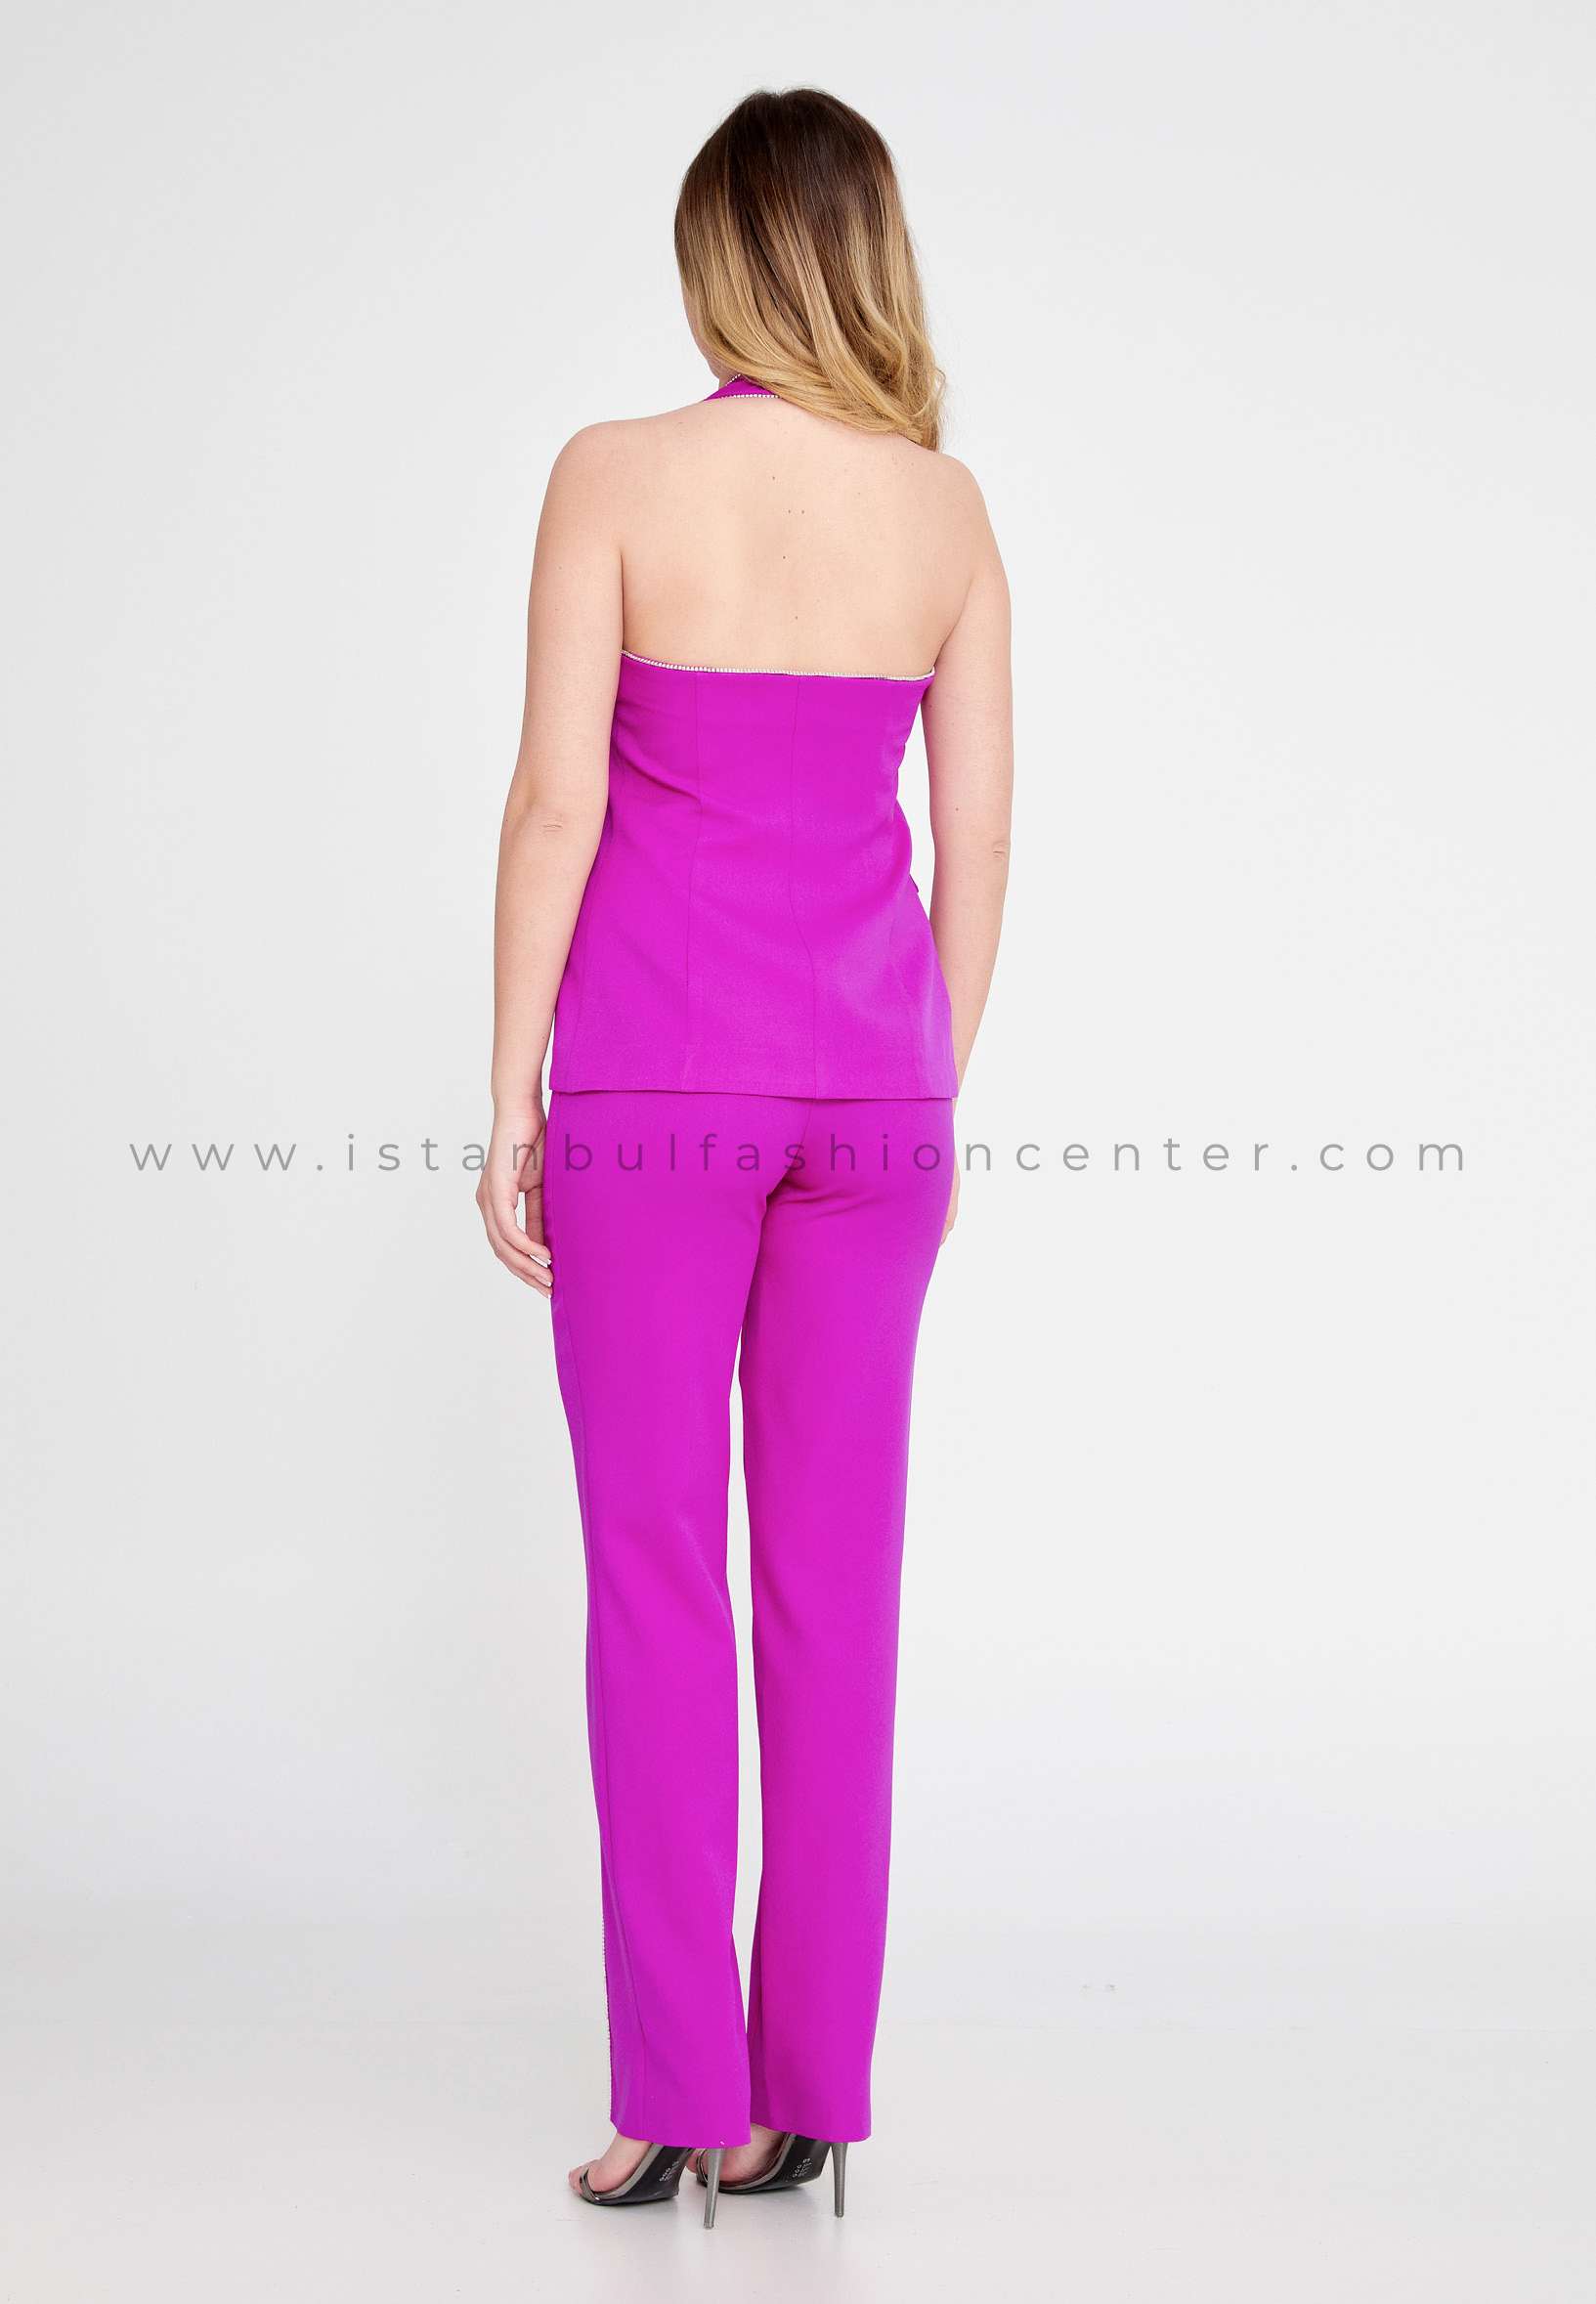 RENGIN Sleeveless Crepe Solid Color Regular Fuchsia Two-Piece Outfit  Ren6106fus